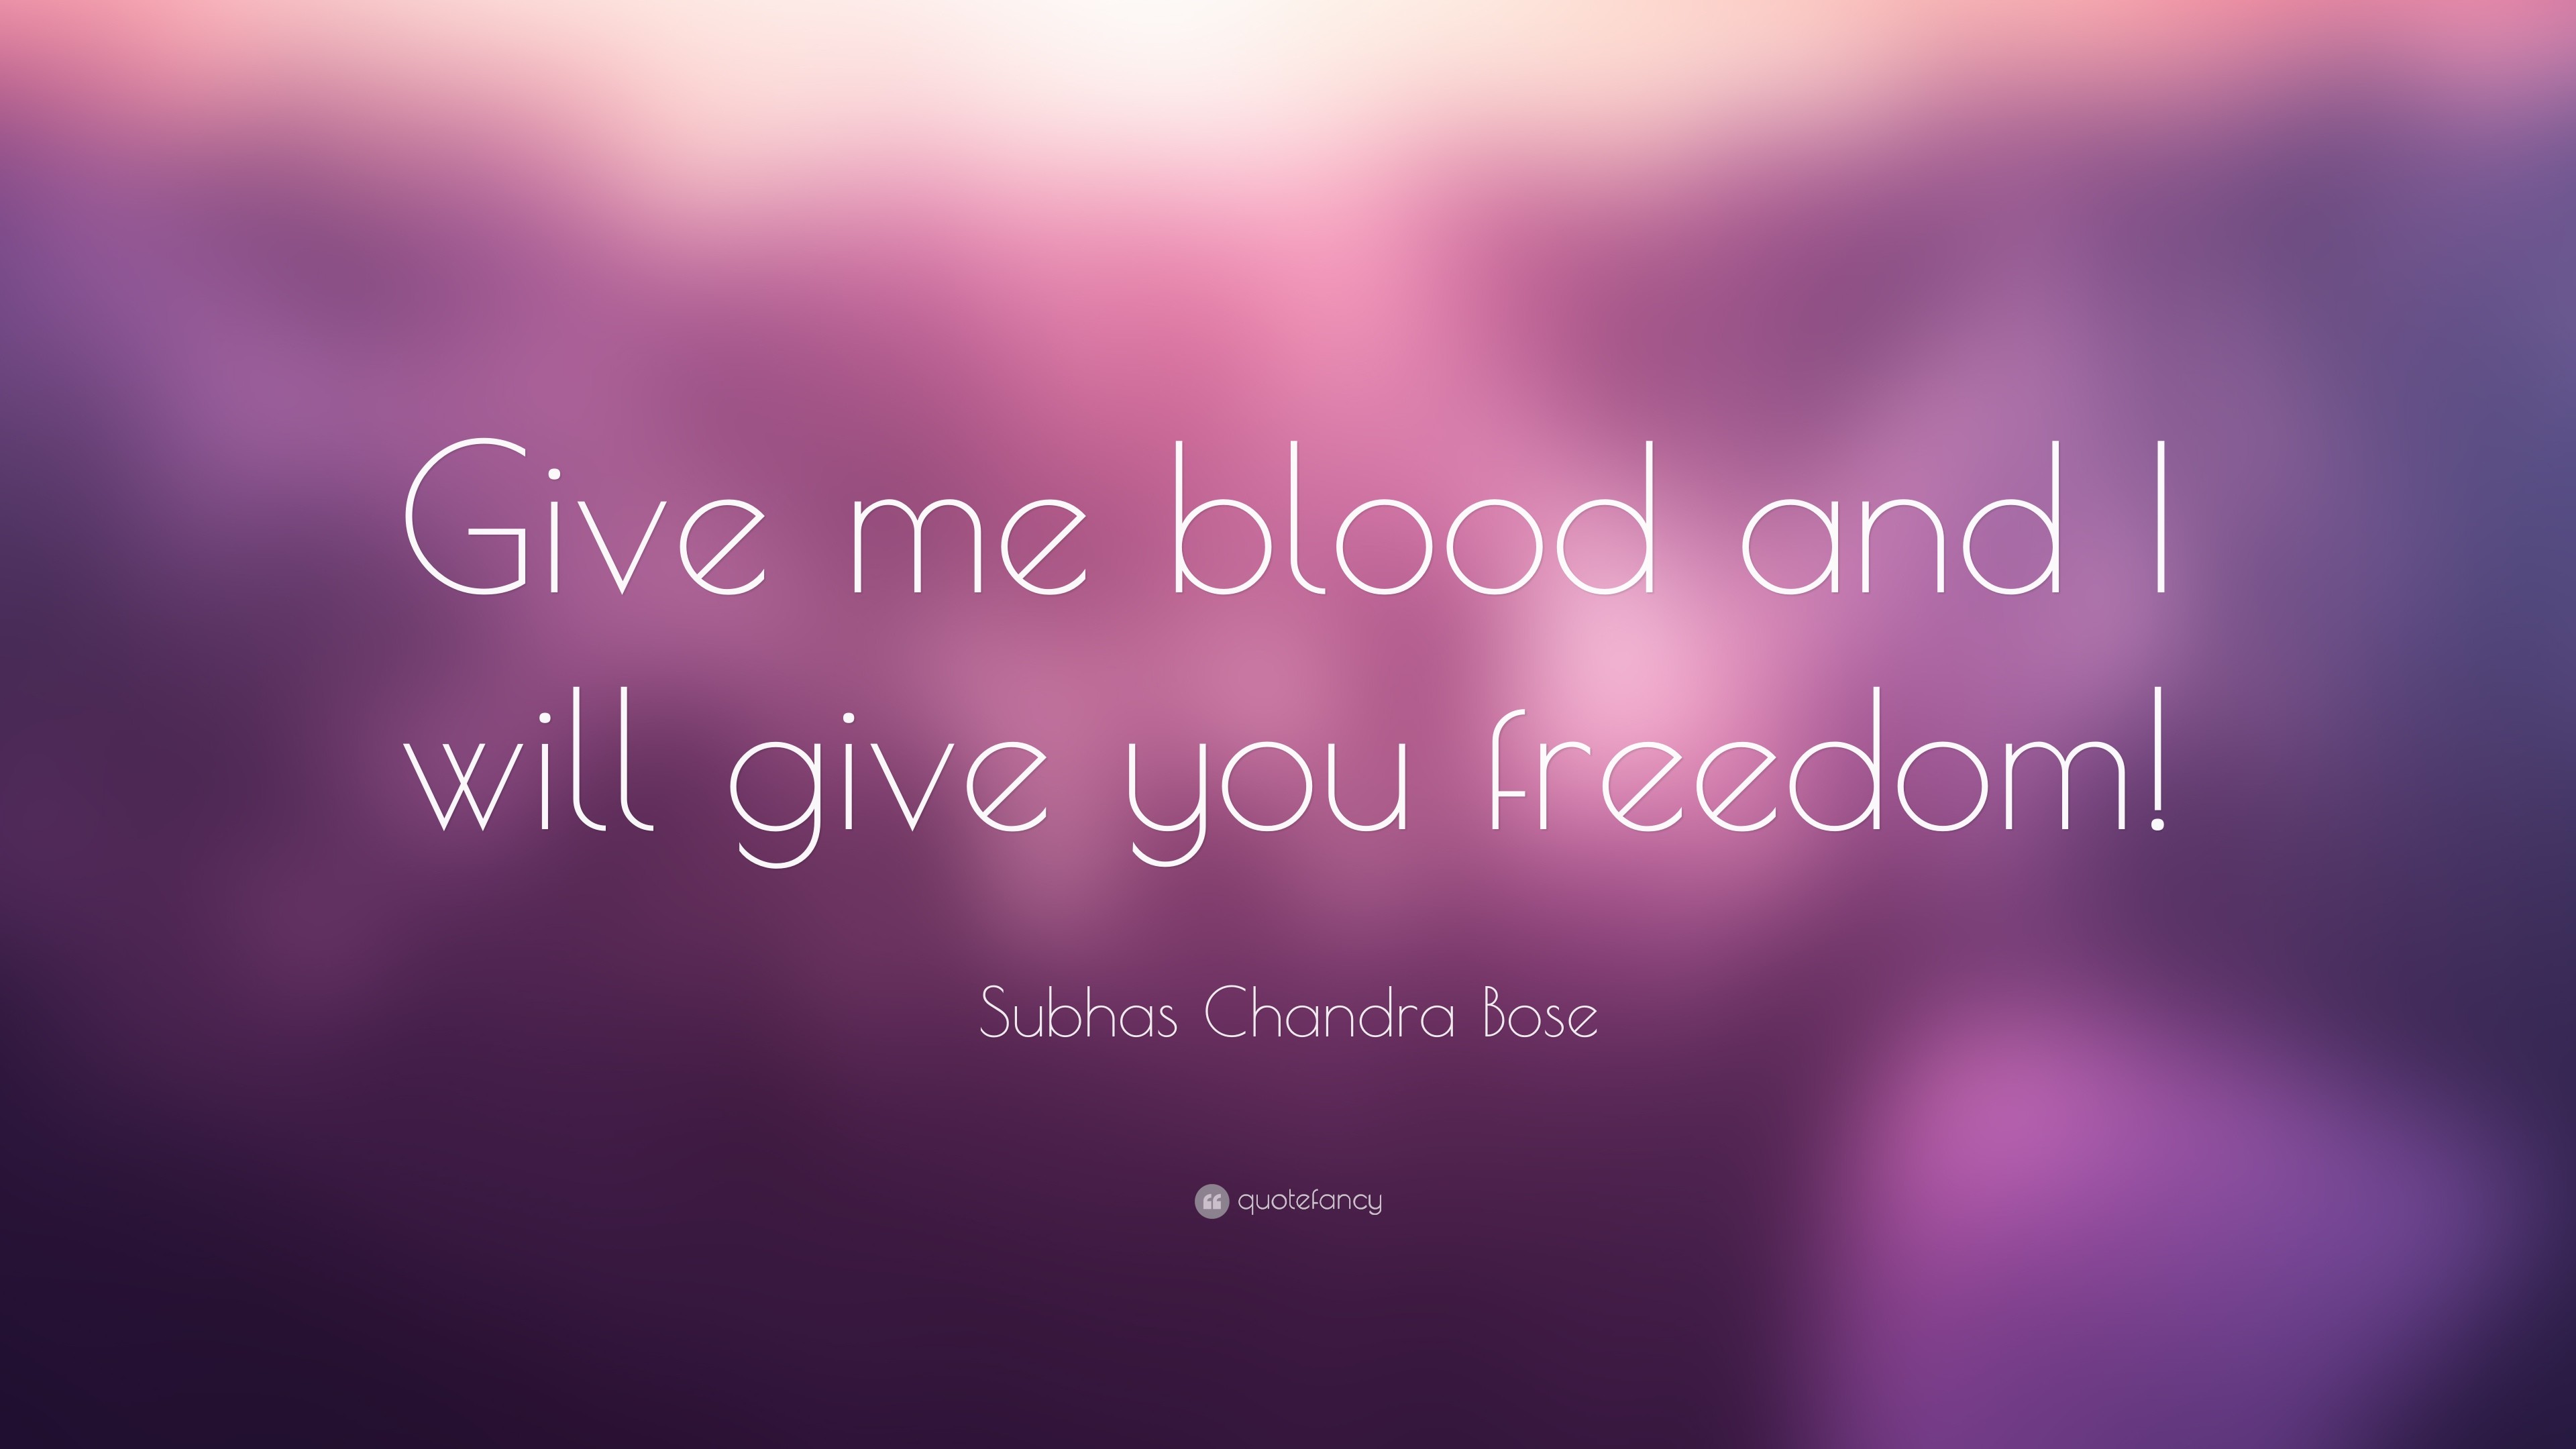 3840x2160 Subhas Chandra Bose Quote: “Give me blood and I will give you freedom!